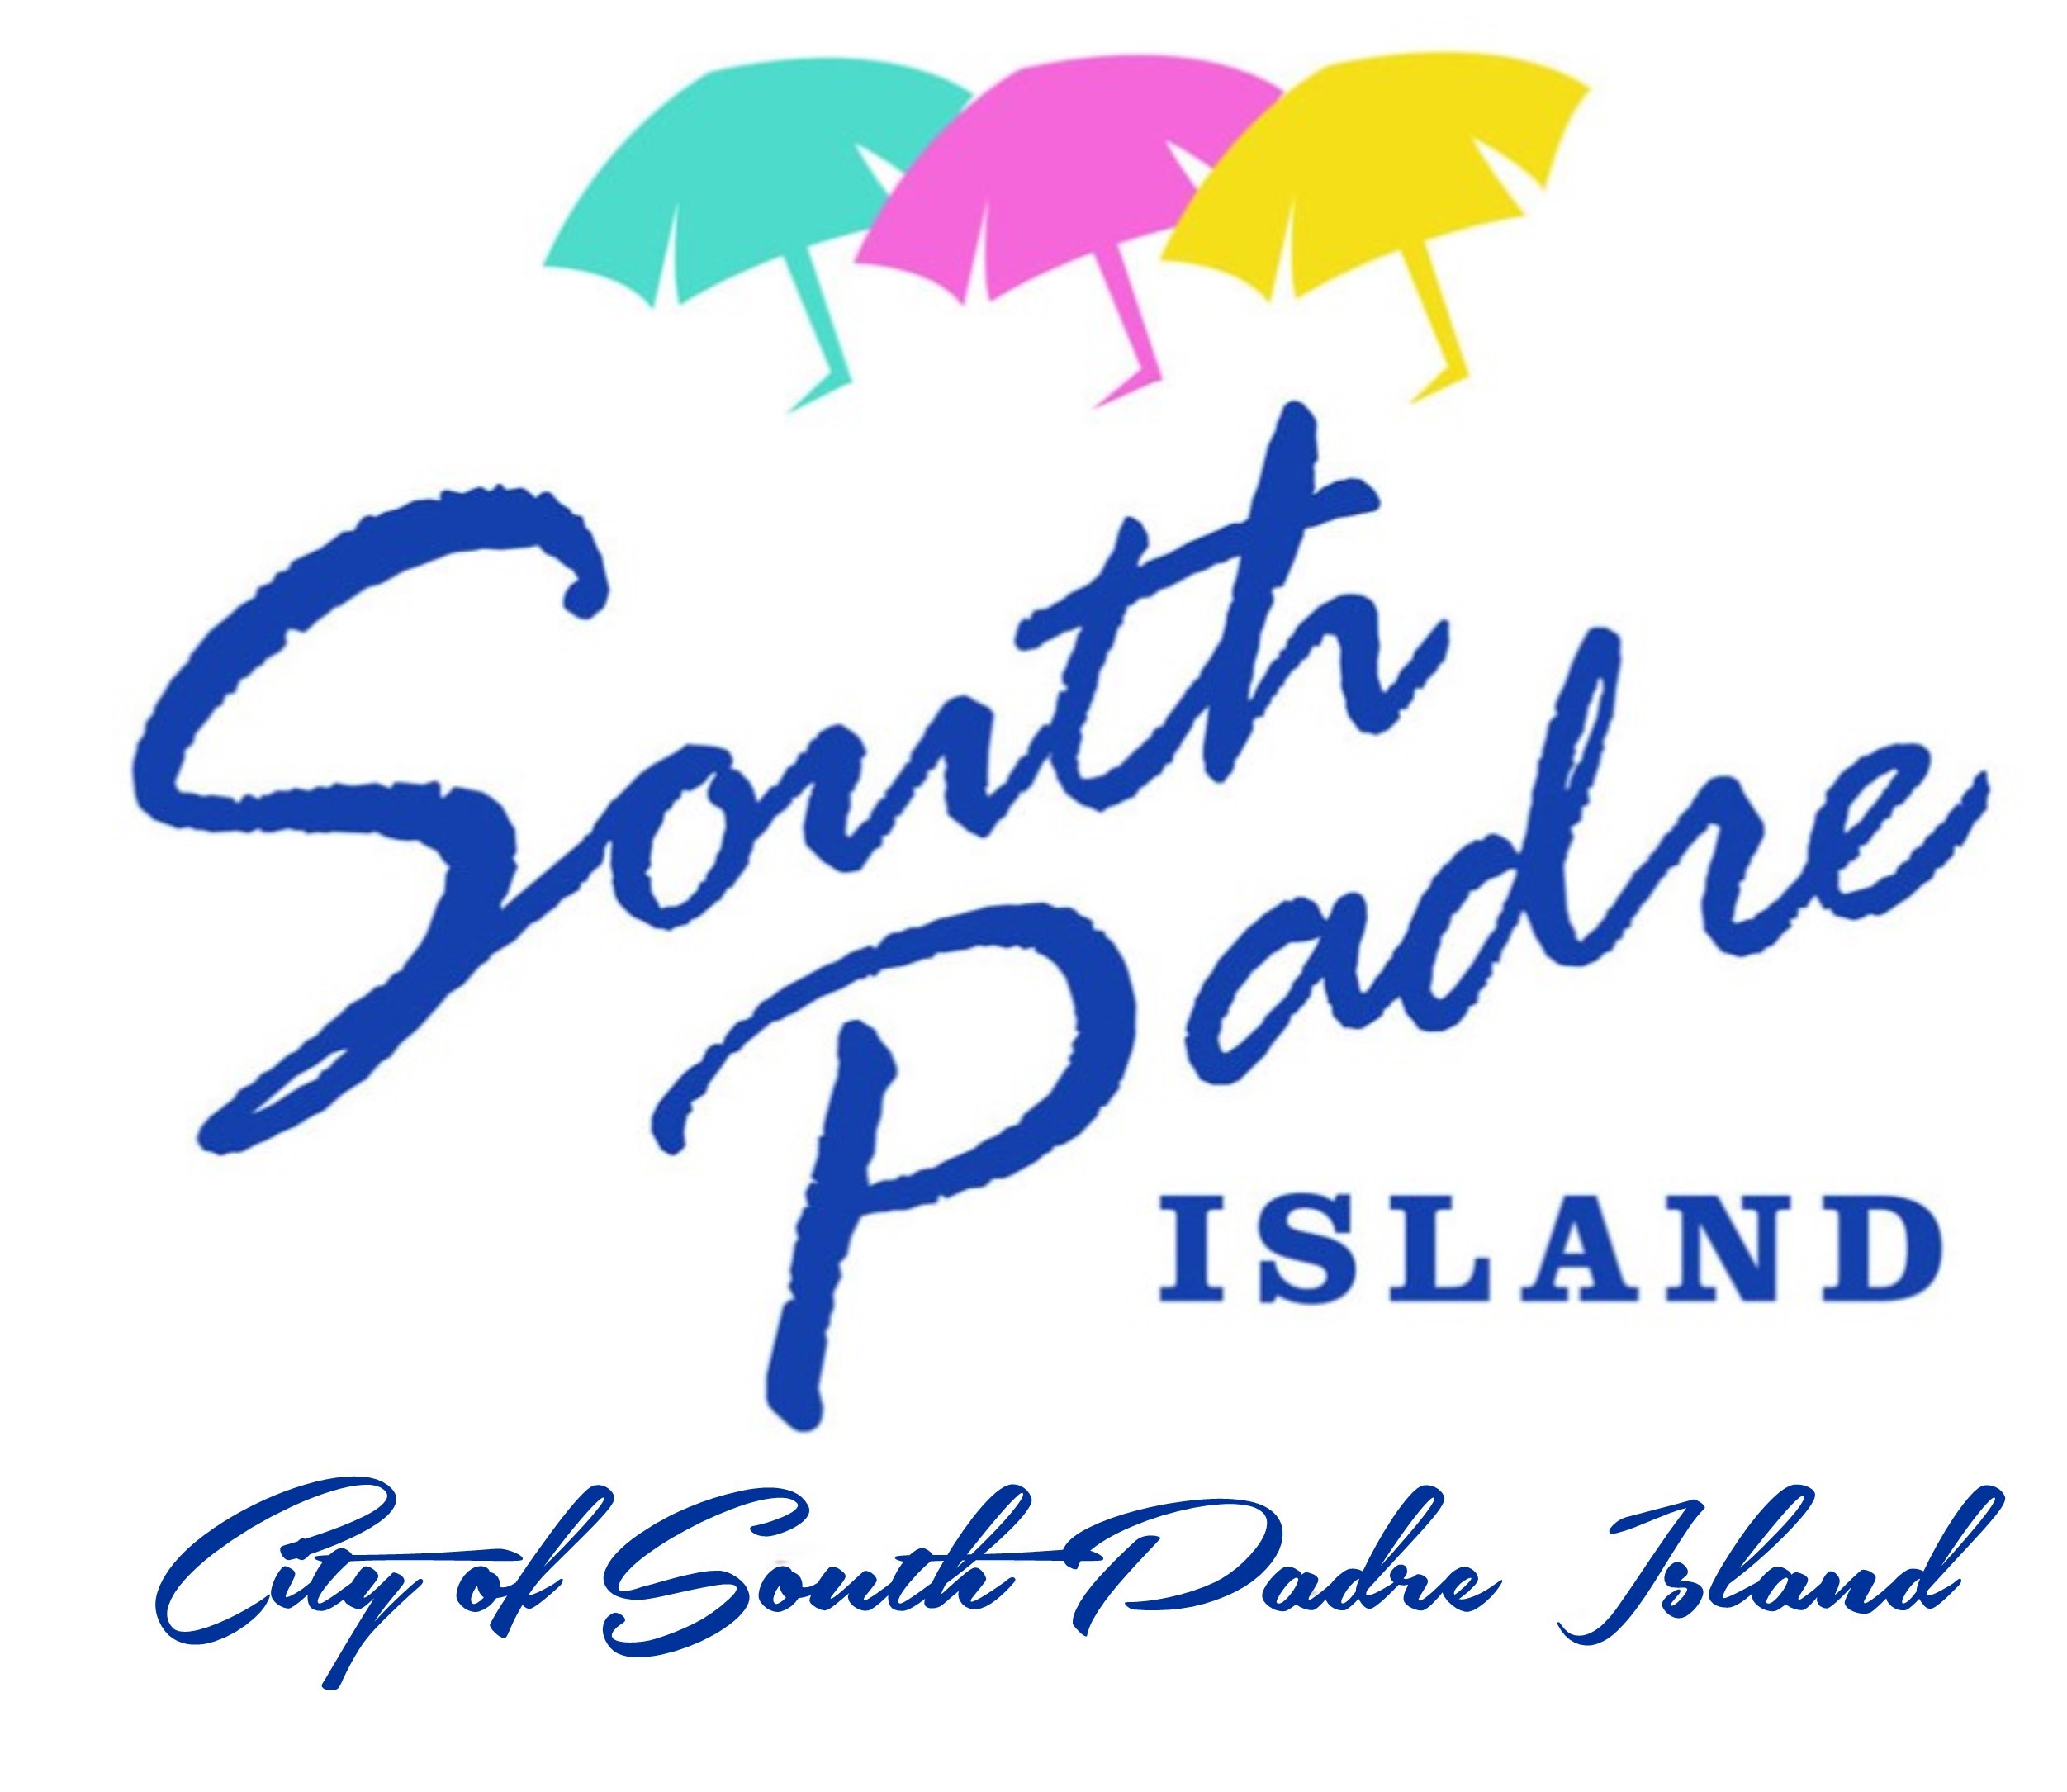 City of South Padre Island